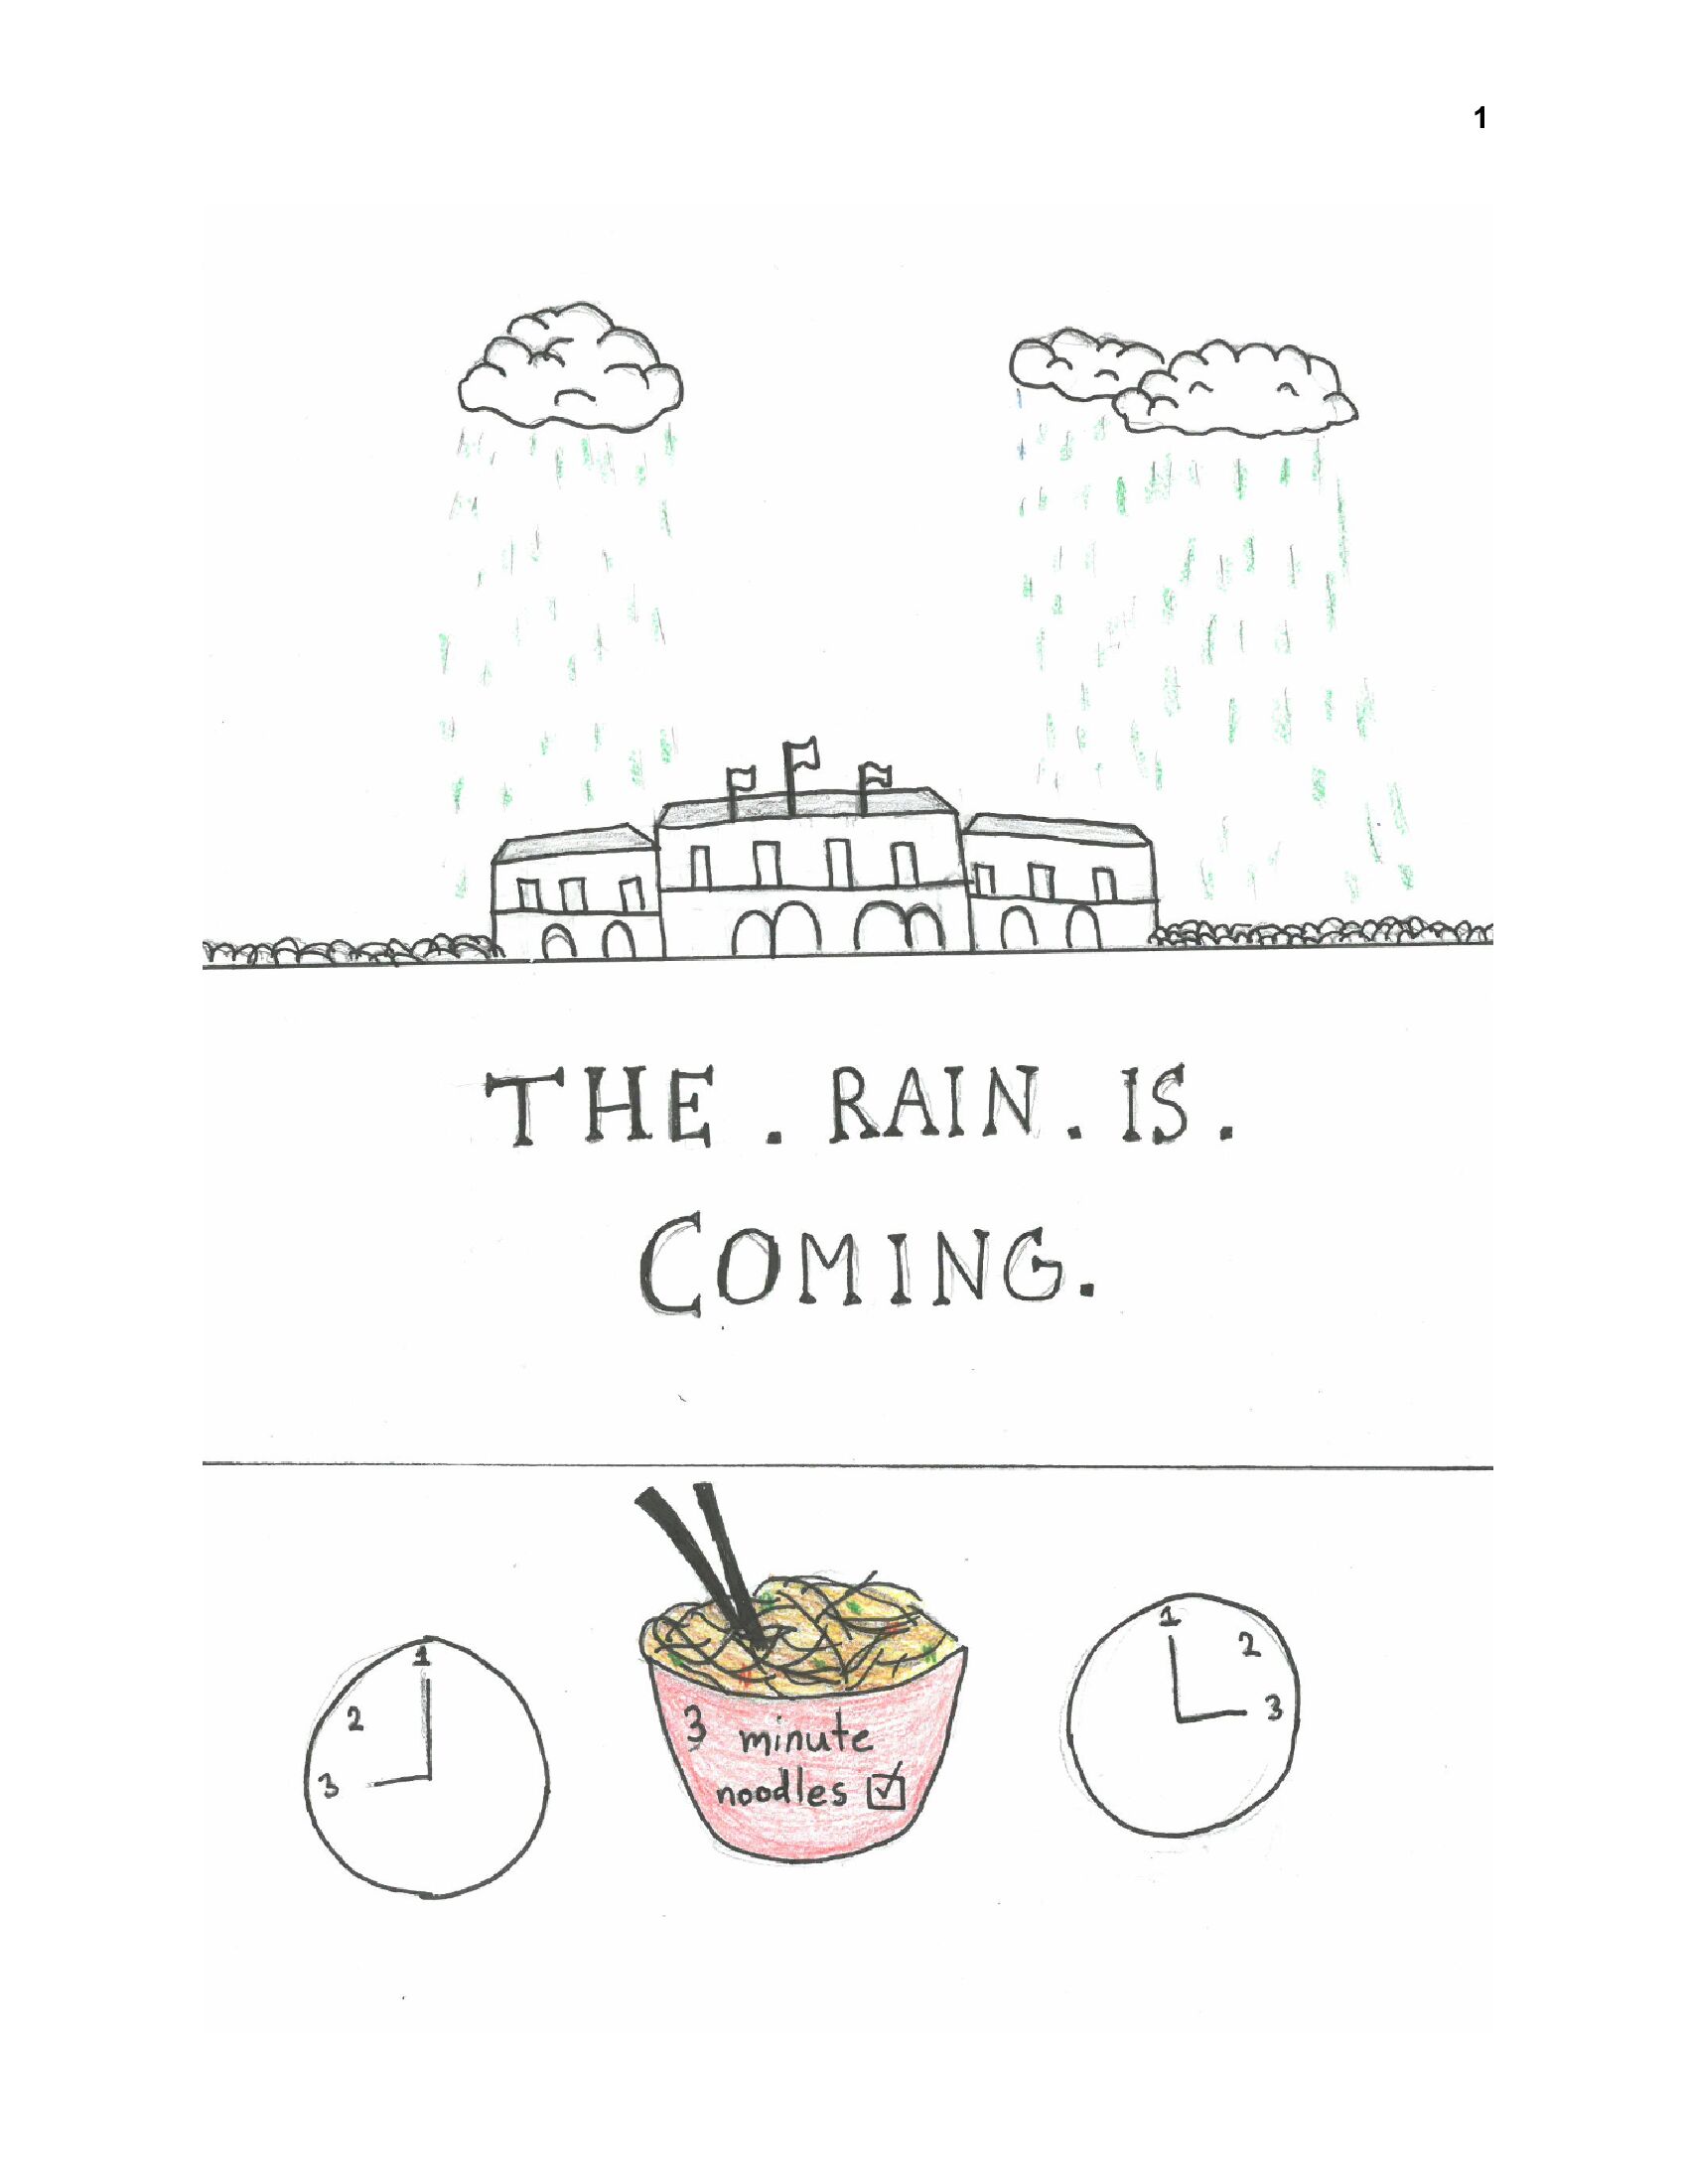 The Rain is Coming